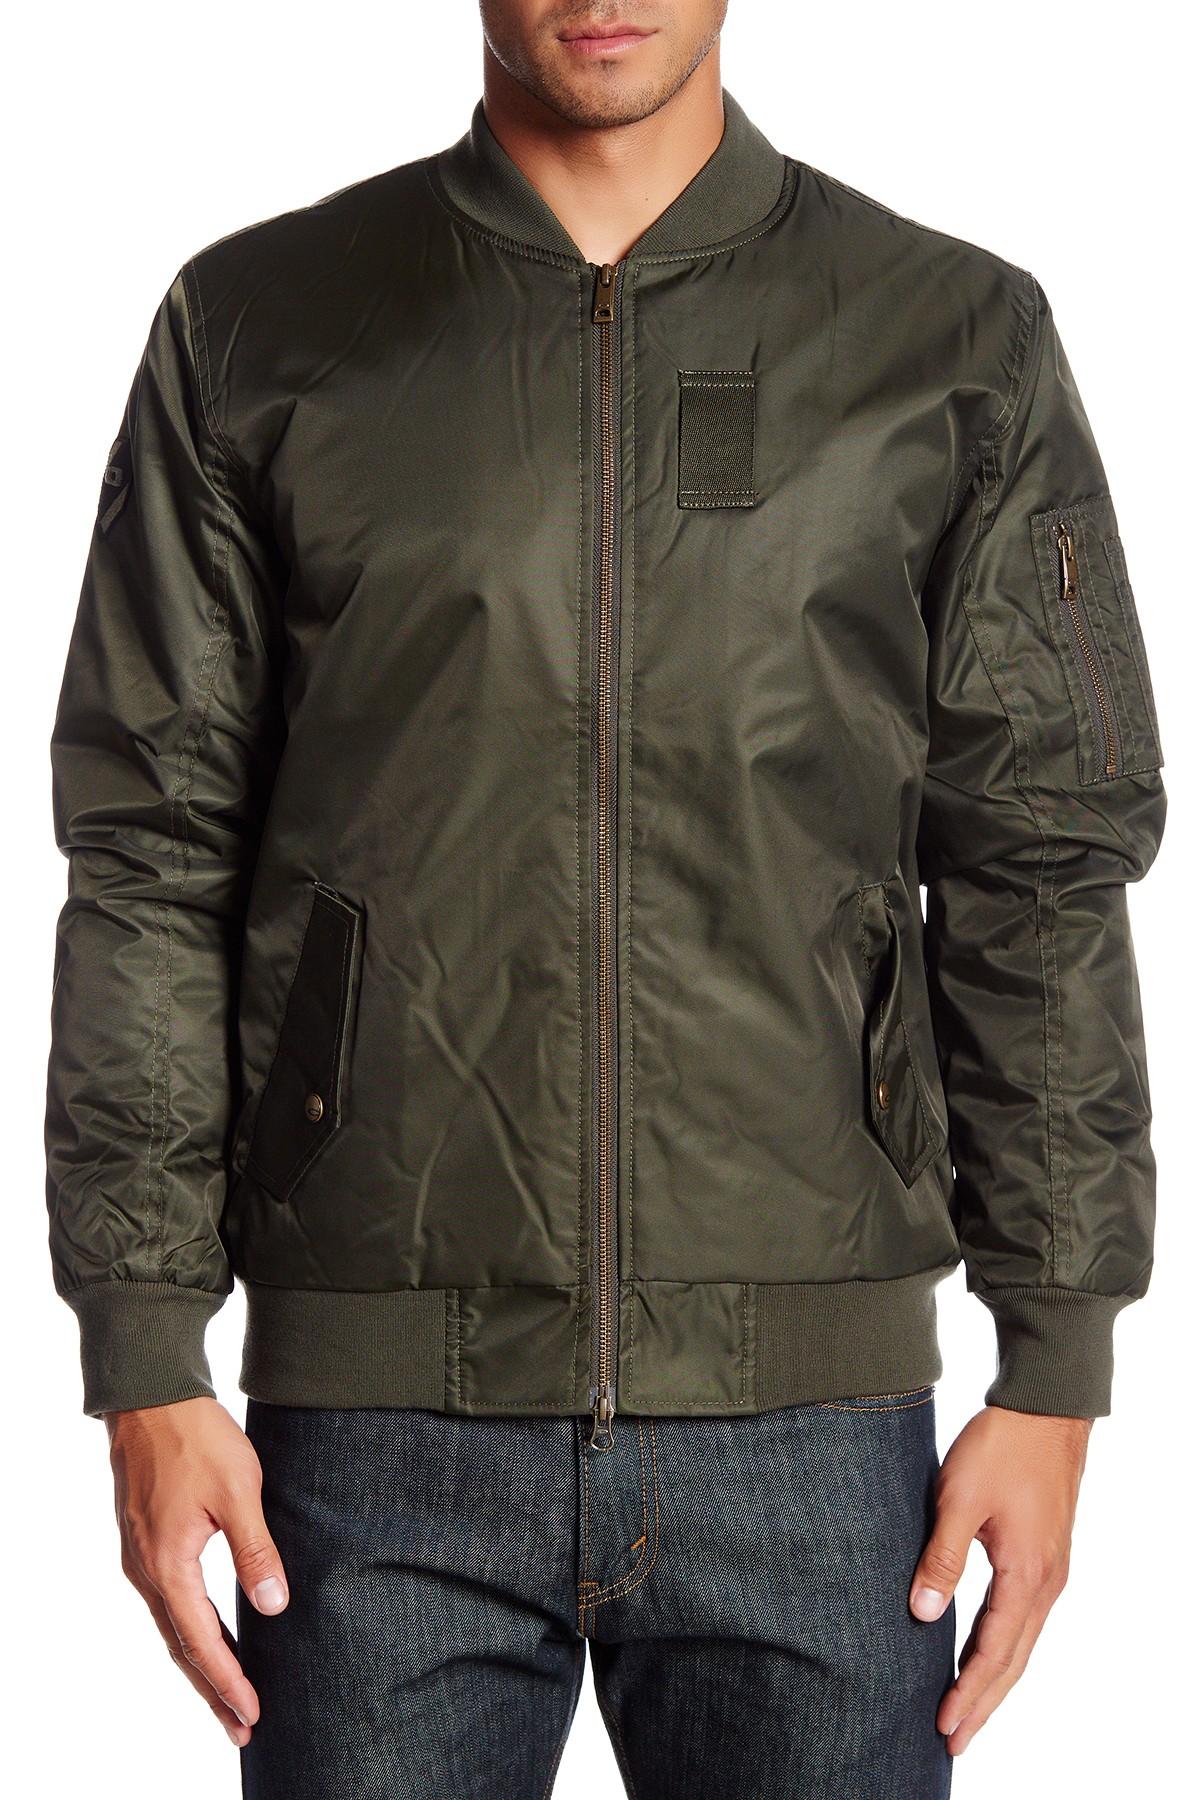 Oakley Synthetic Bomb Squad Jacket in Green for Men - Lyst